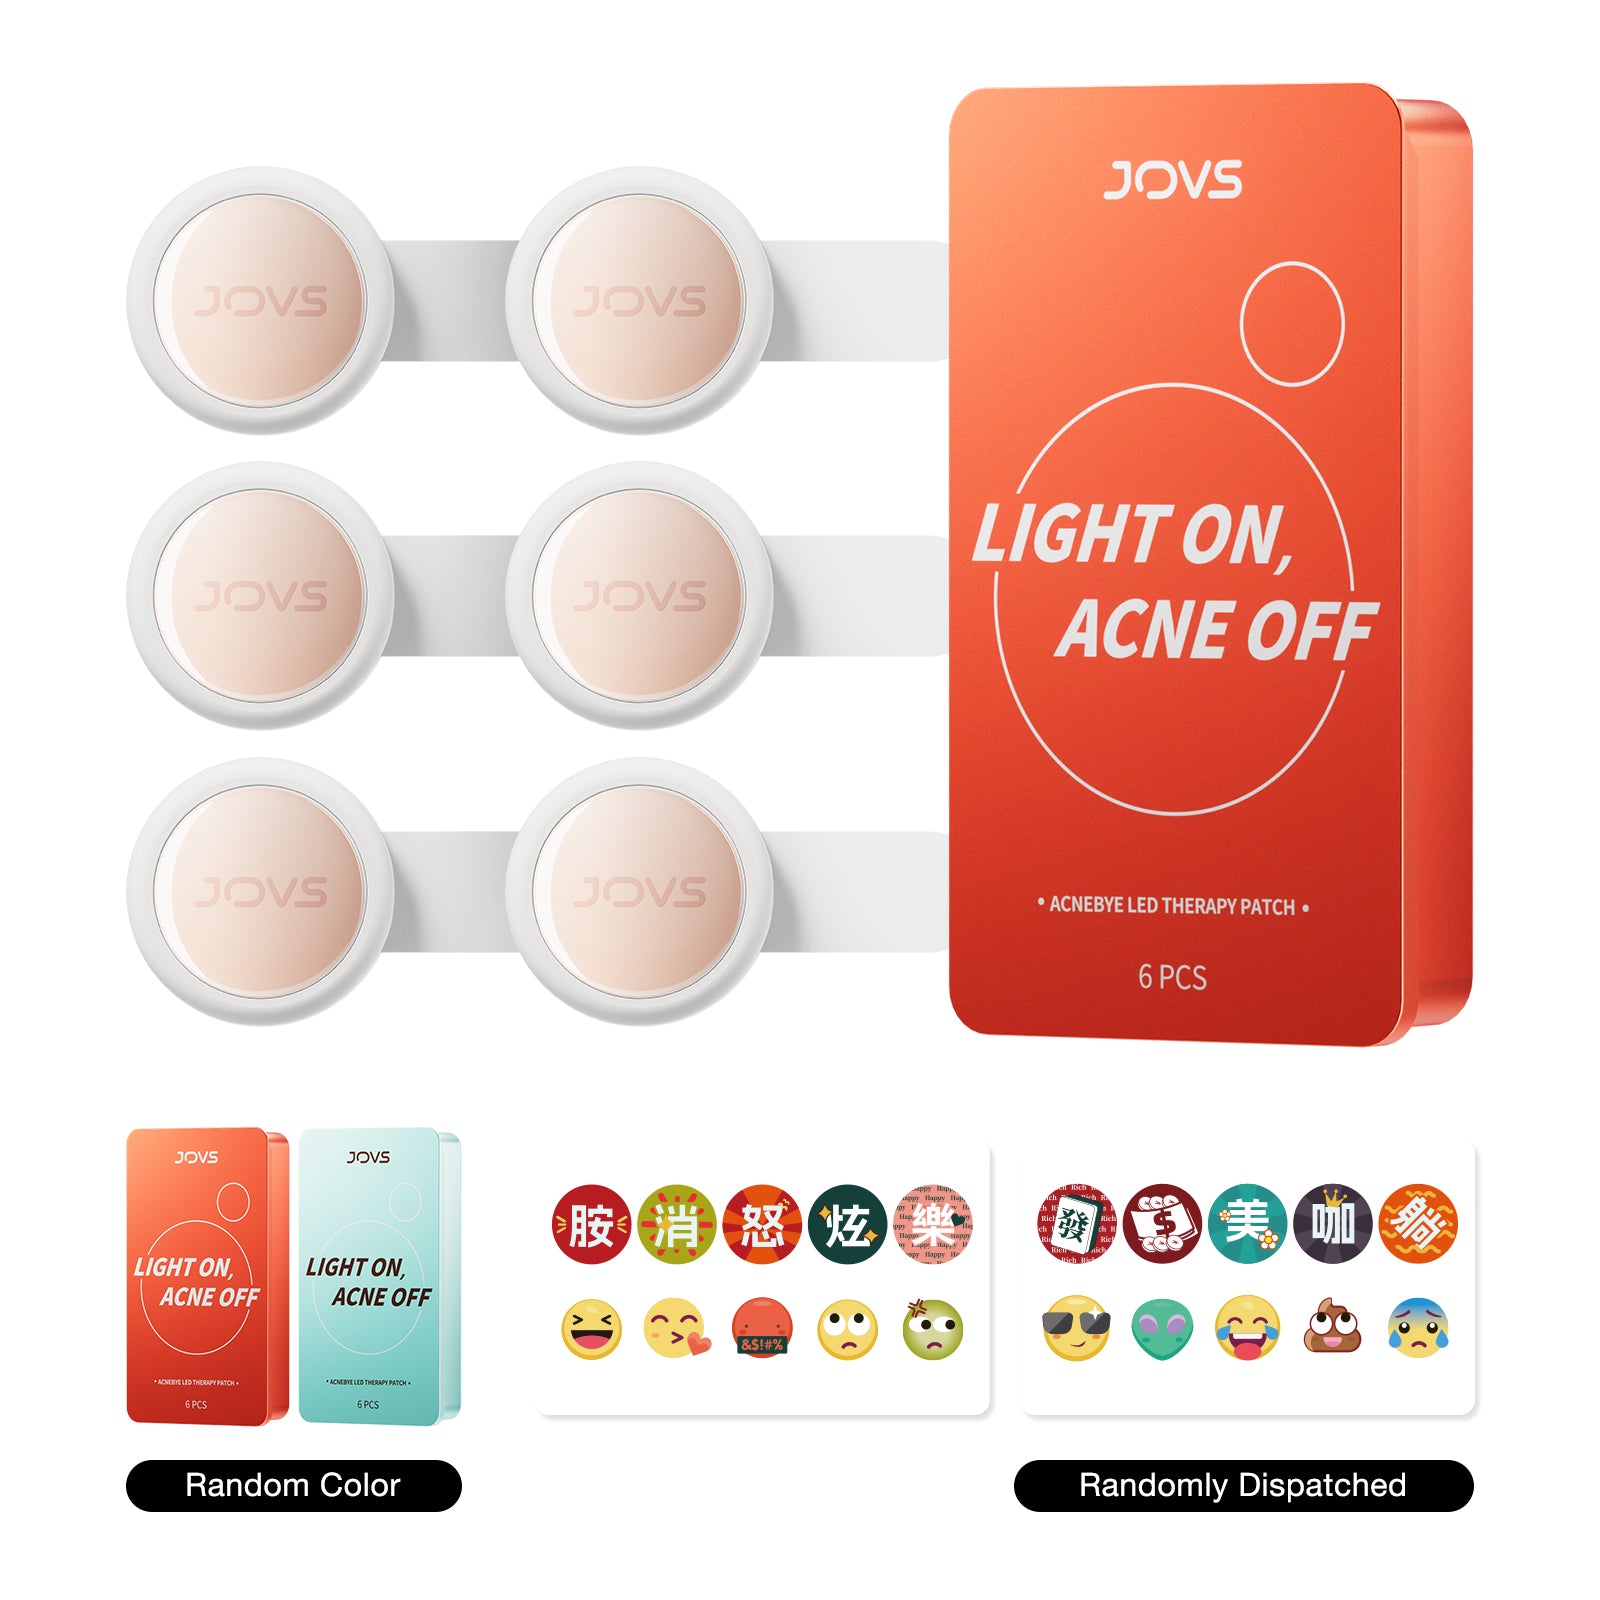 JOVS Acnebye LED Therapy Patch with six discs red packaging for effective acne treatment.